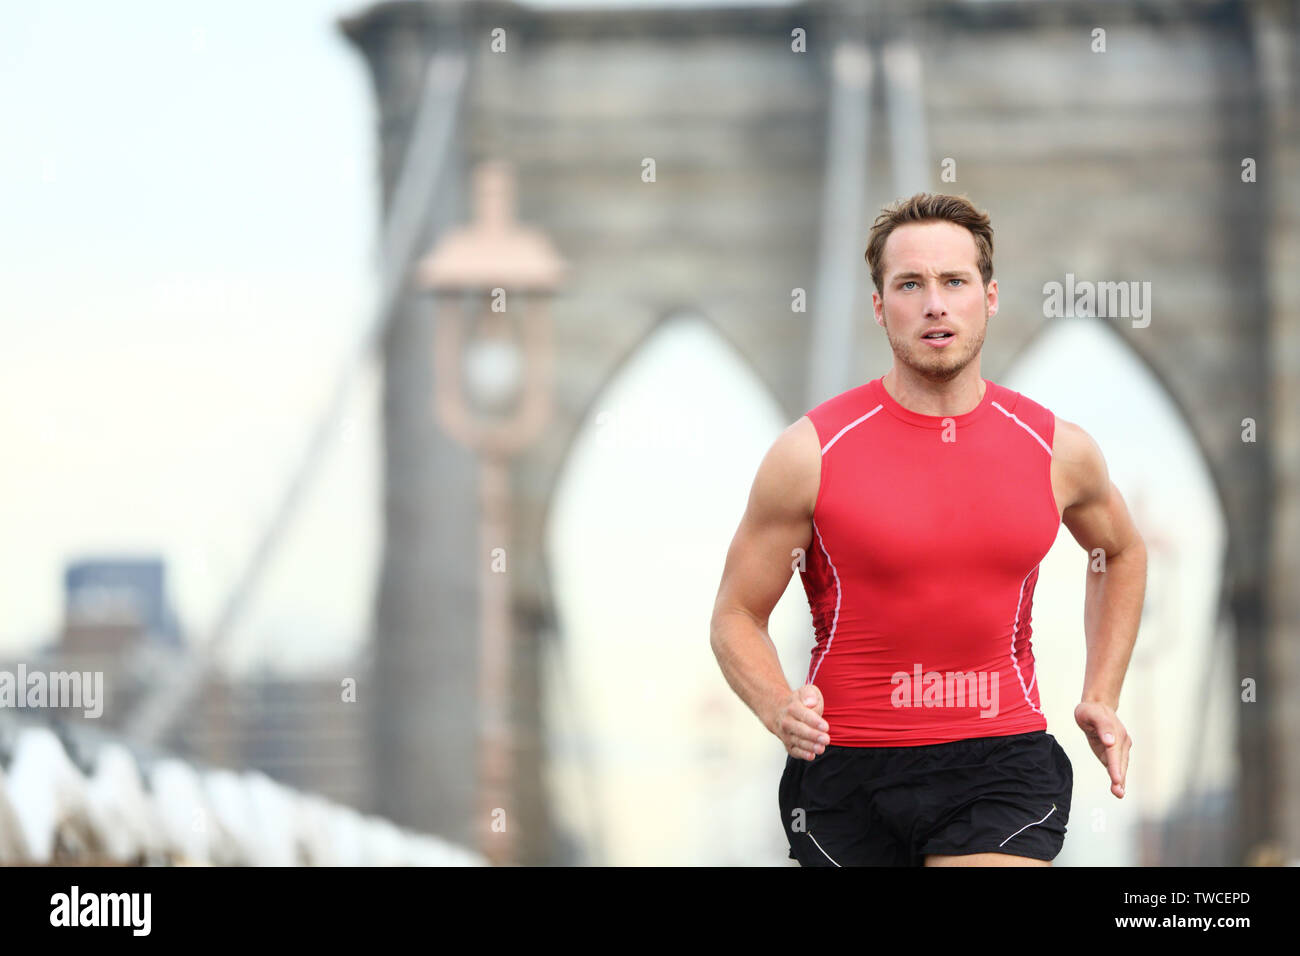 Running man sprinting in New York City. Runner on training run outside. Caucasian male runner and fitness sport model in sprint wearing compression clothing on Brooklyn Bridge, New York City, USA. Stock Photo